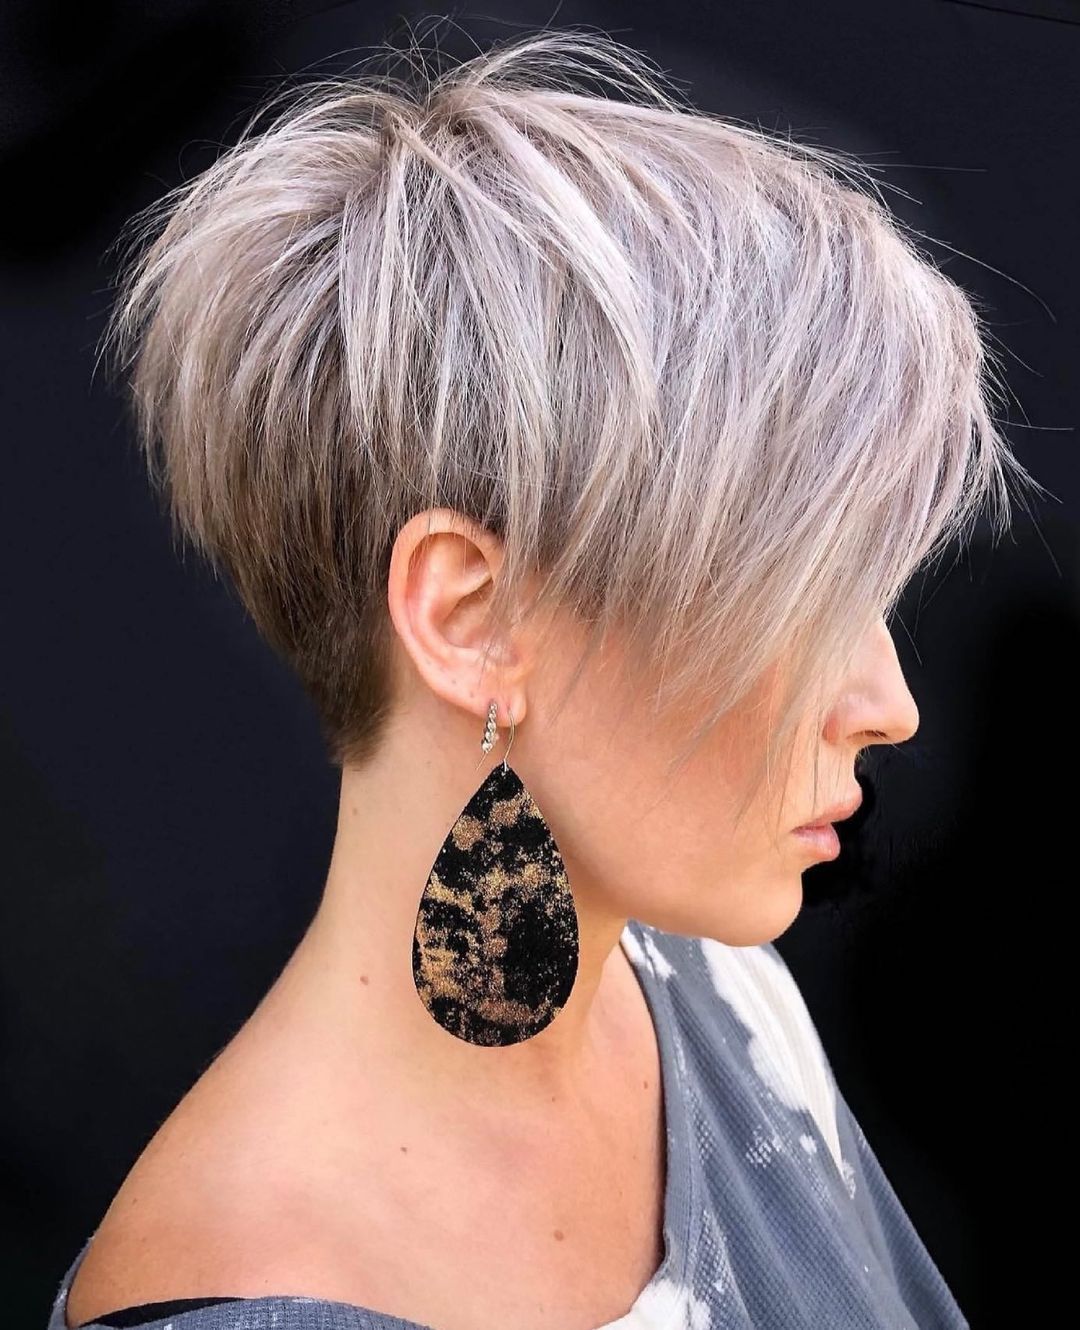 1642618087 576 Hair trends that can stay in the next year - Hair trends that can stay in the next year